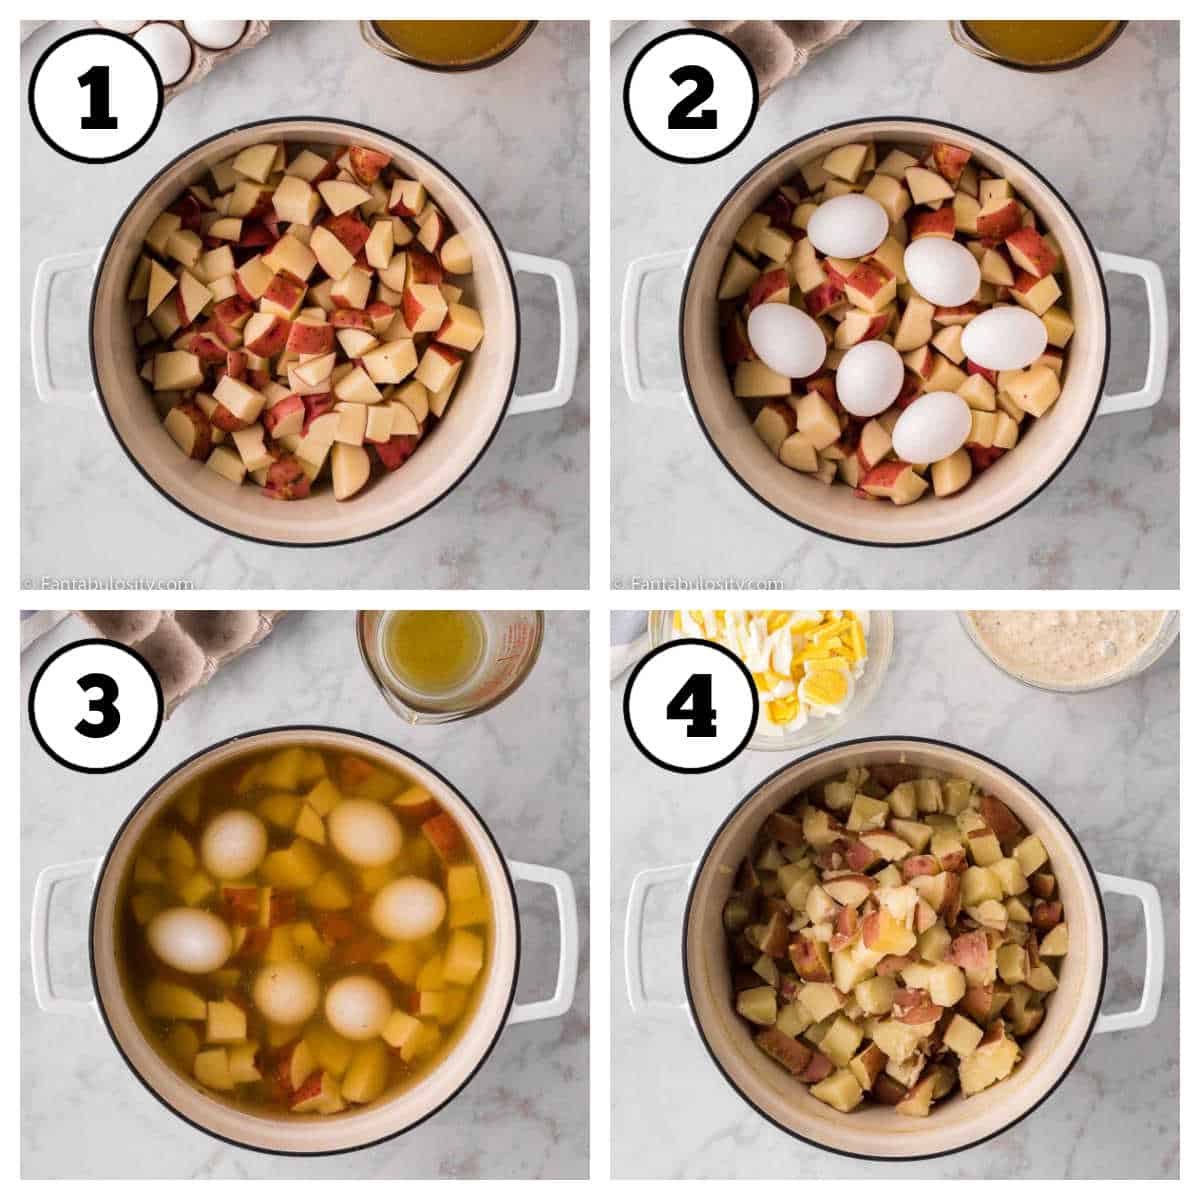 Steps 1-4 for how to make red skin potato salad.